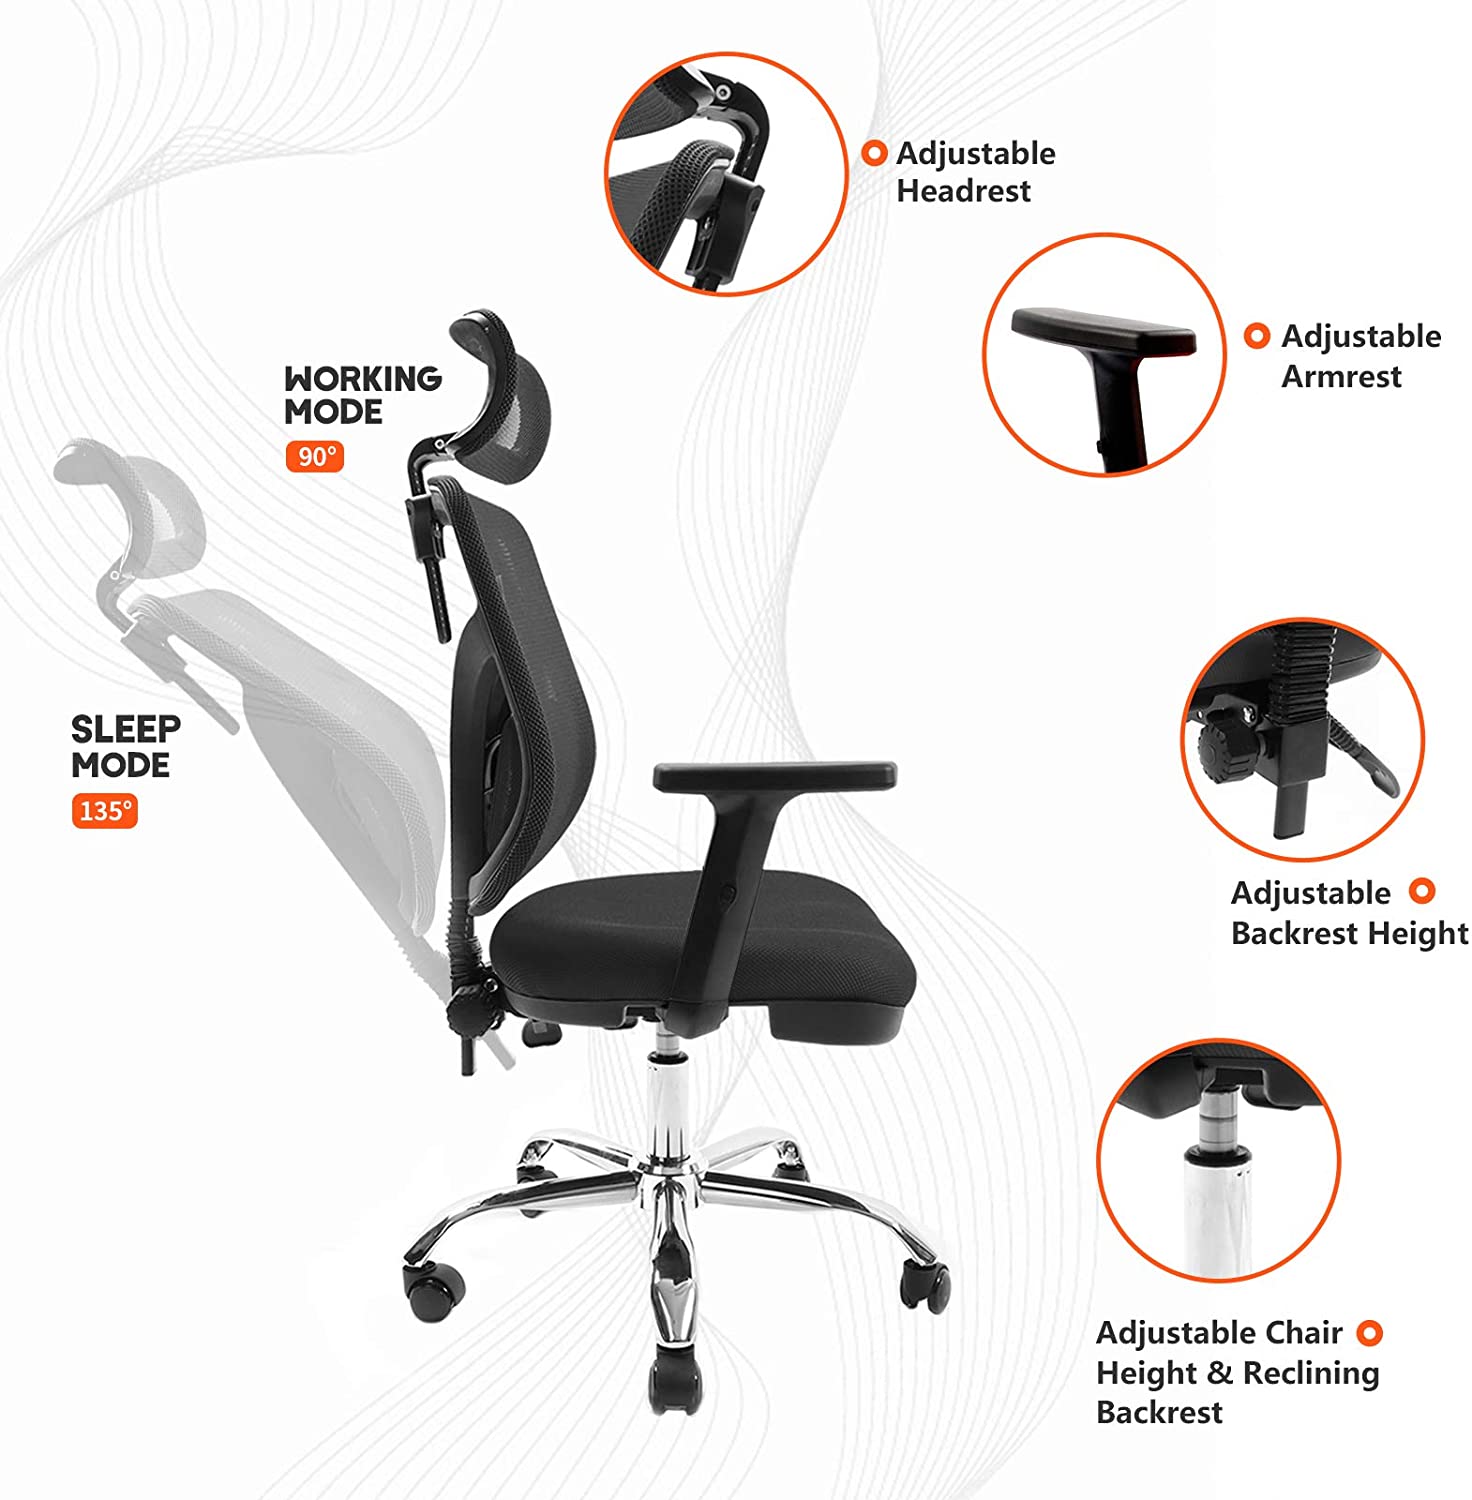 HARBLAND Ergonomic Office Chair with Adjustable Headrest Backrest and -  Harbland